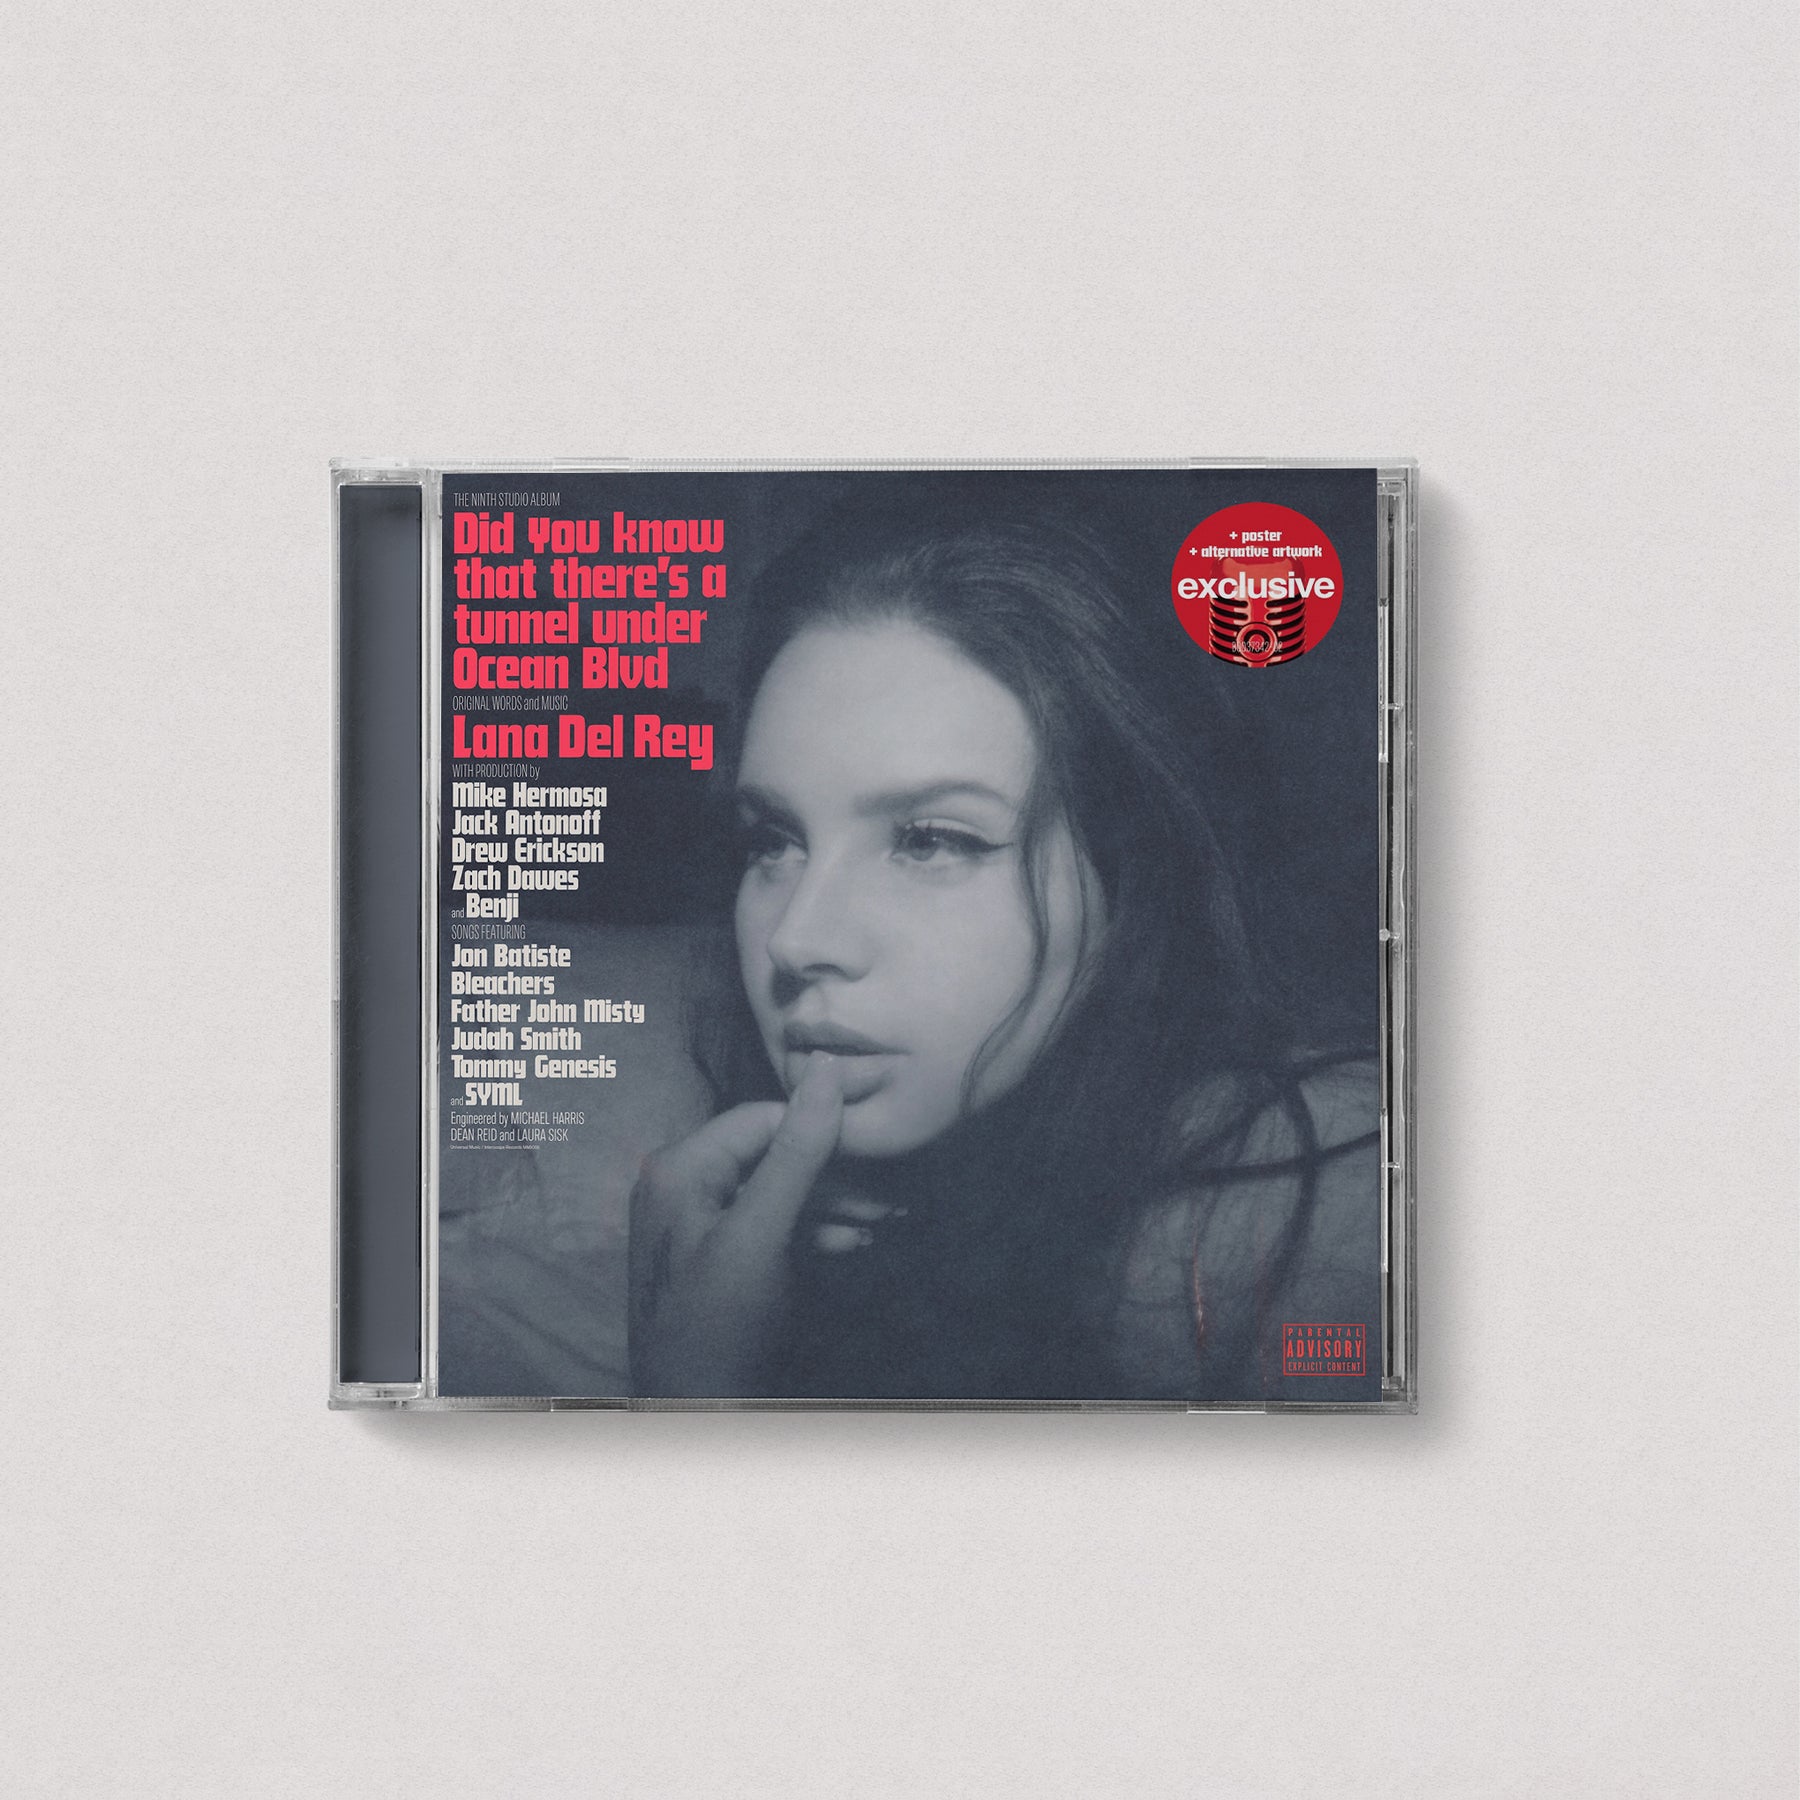 Lana Del Rey - Did You Know That There’s a Tunnel Under Ocean Blvd (Target Exclusive, CD)